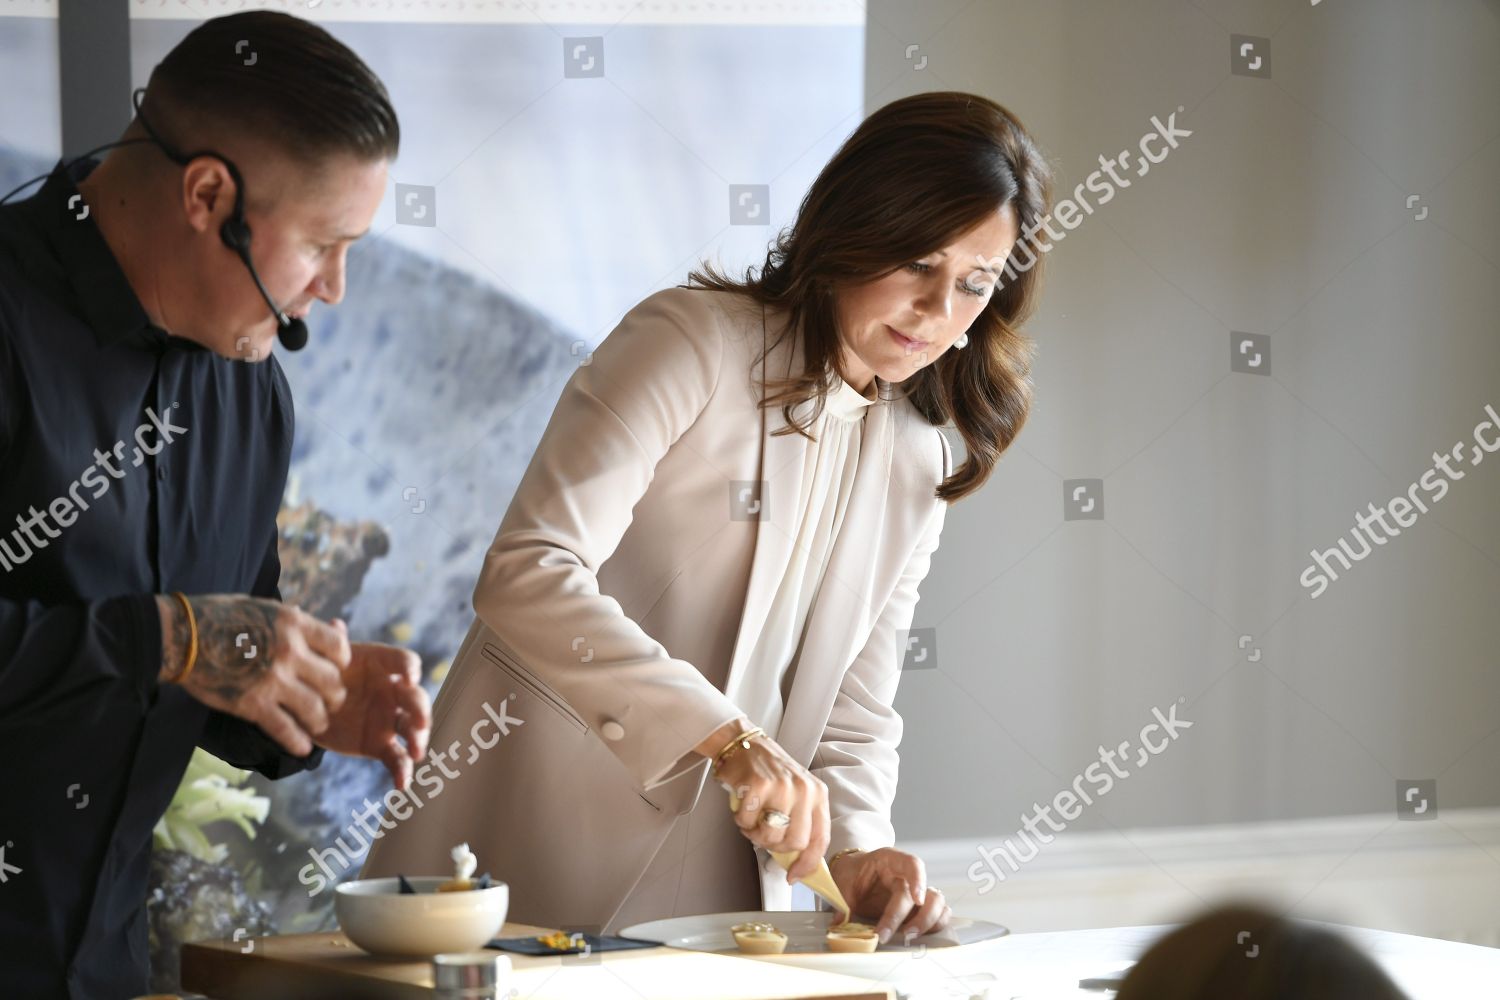 crown-princess-mary-visit-to-finland-shutterstock-editorial-9881096p.jpg